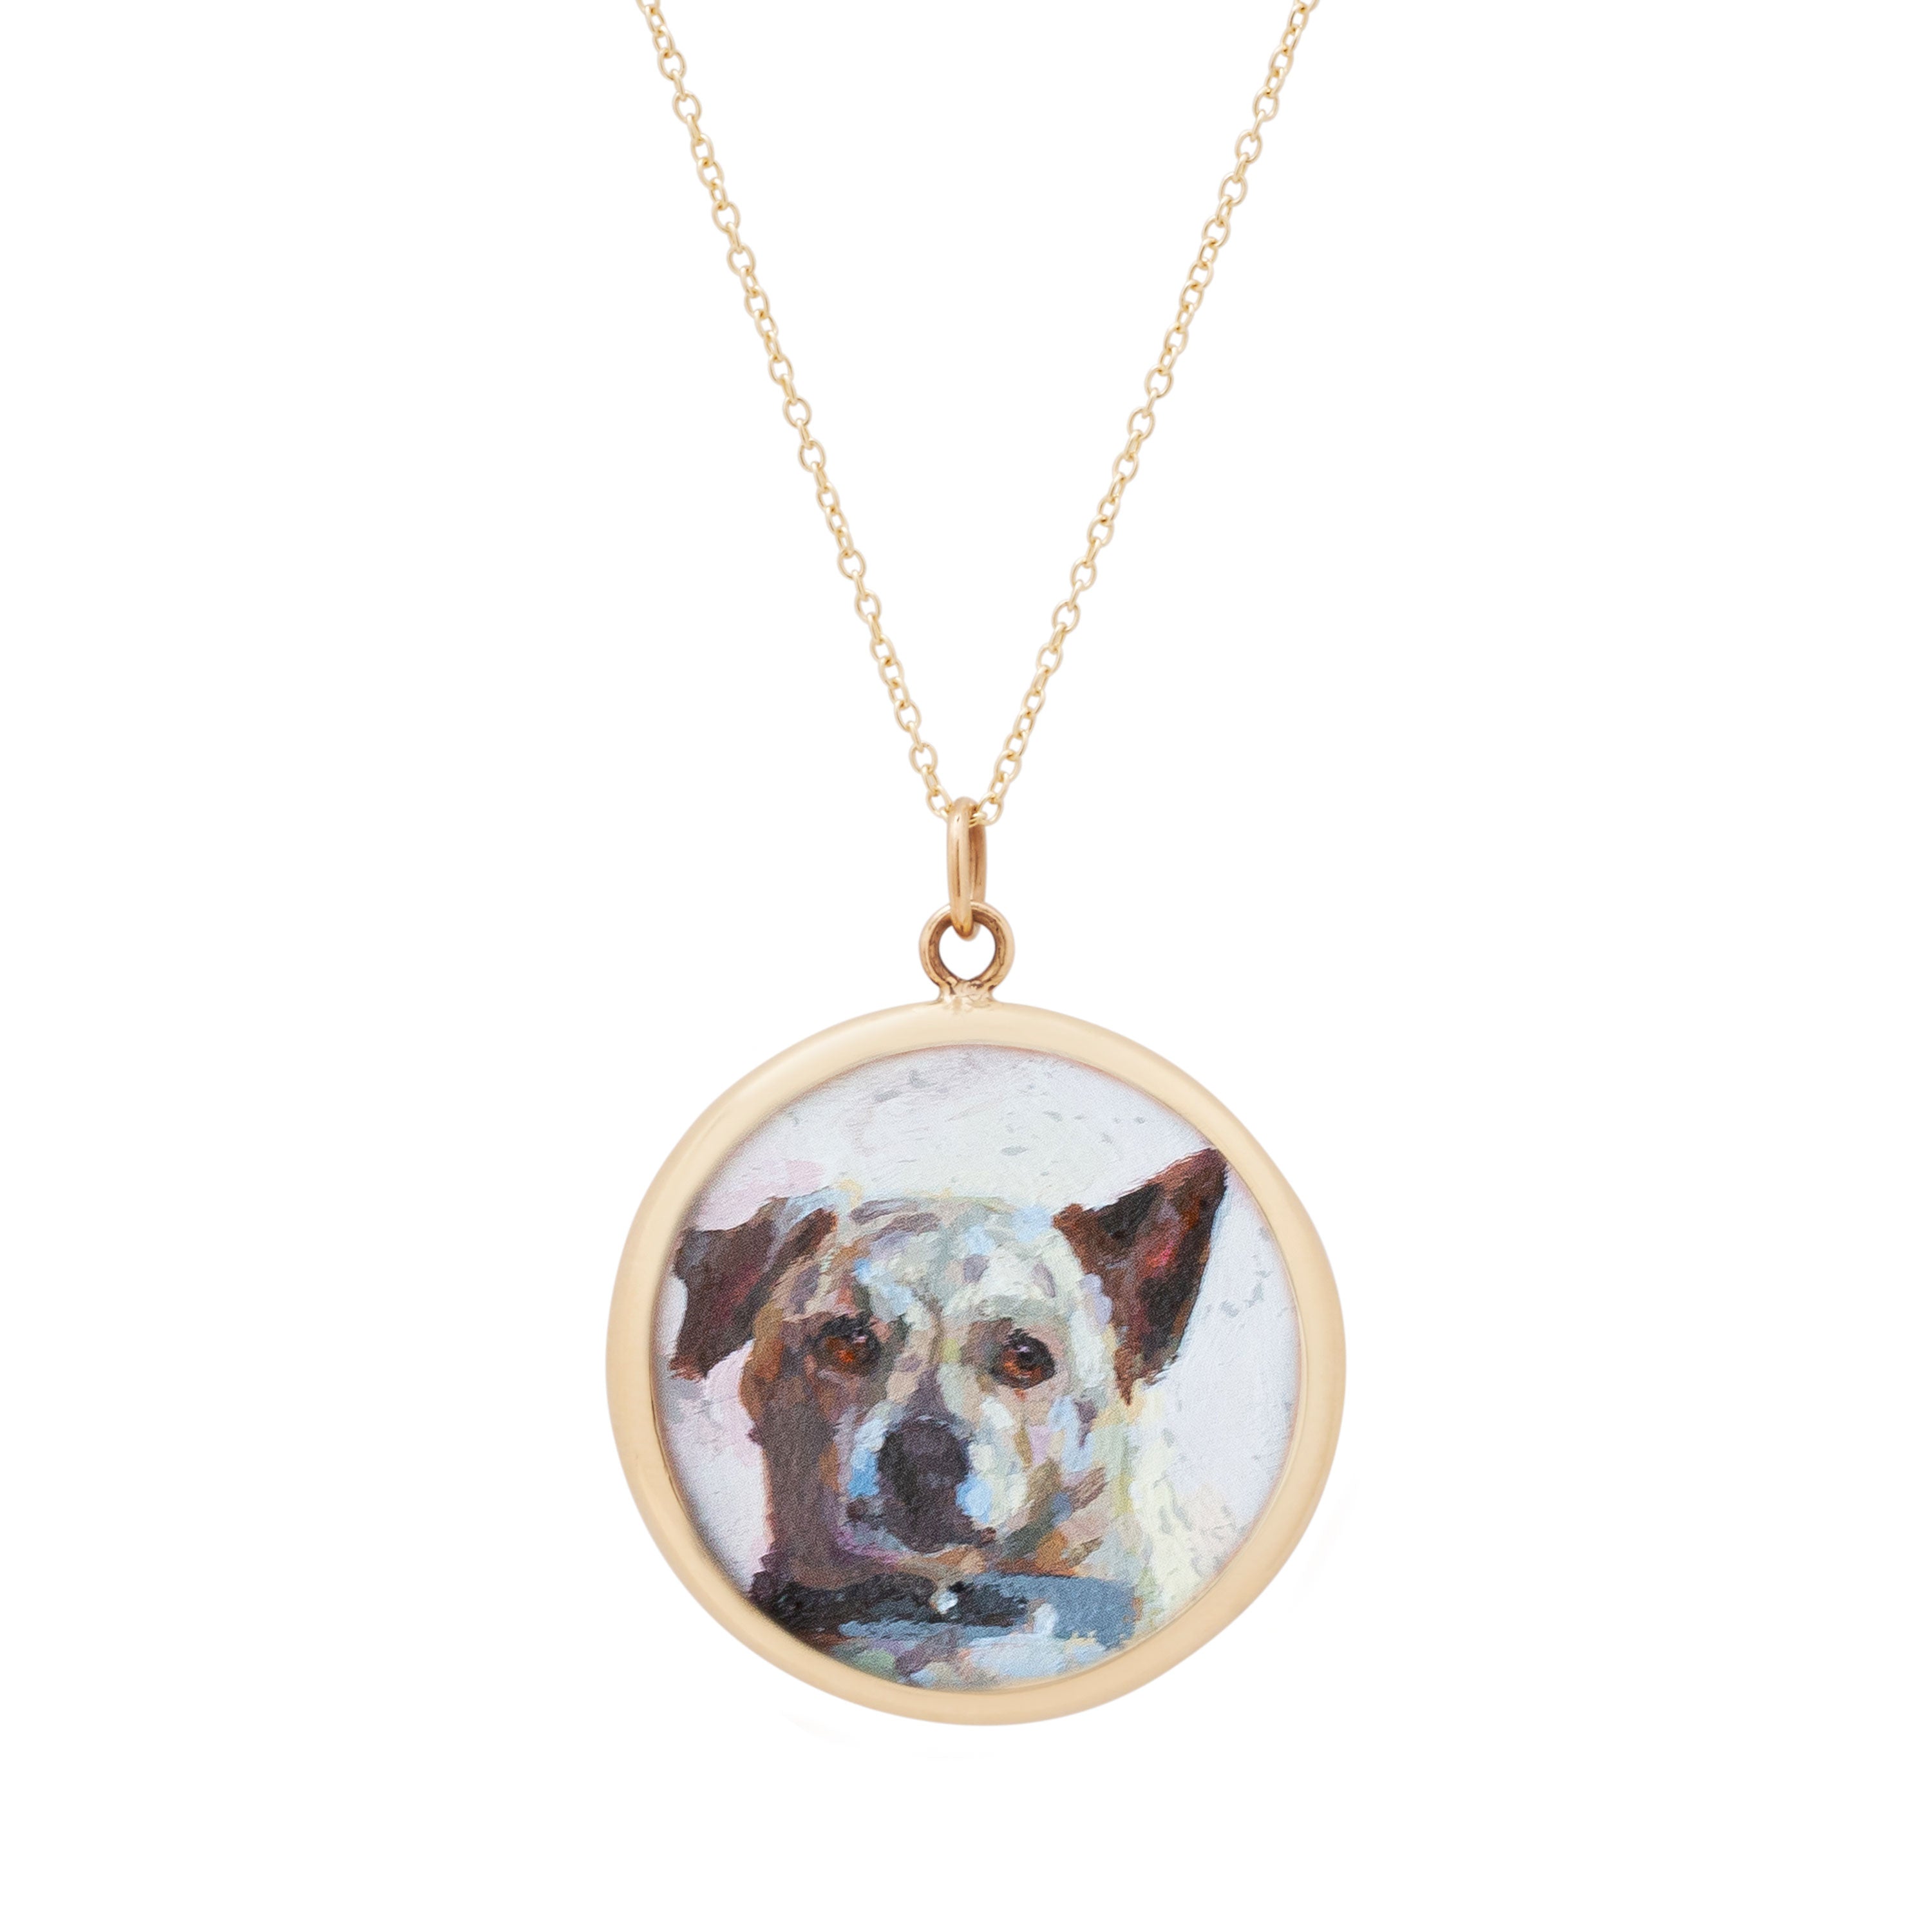 Accessory Small Dog with Bell Cat Collar Dog Necklace Pet Chain Dog Gold  Chain | eBay